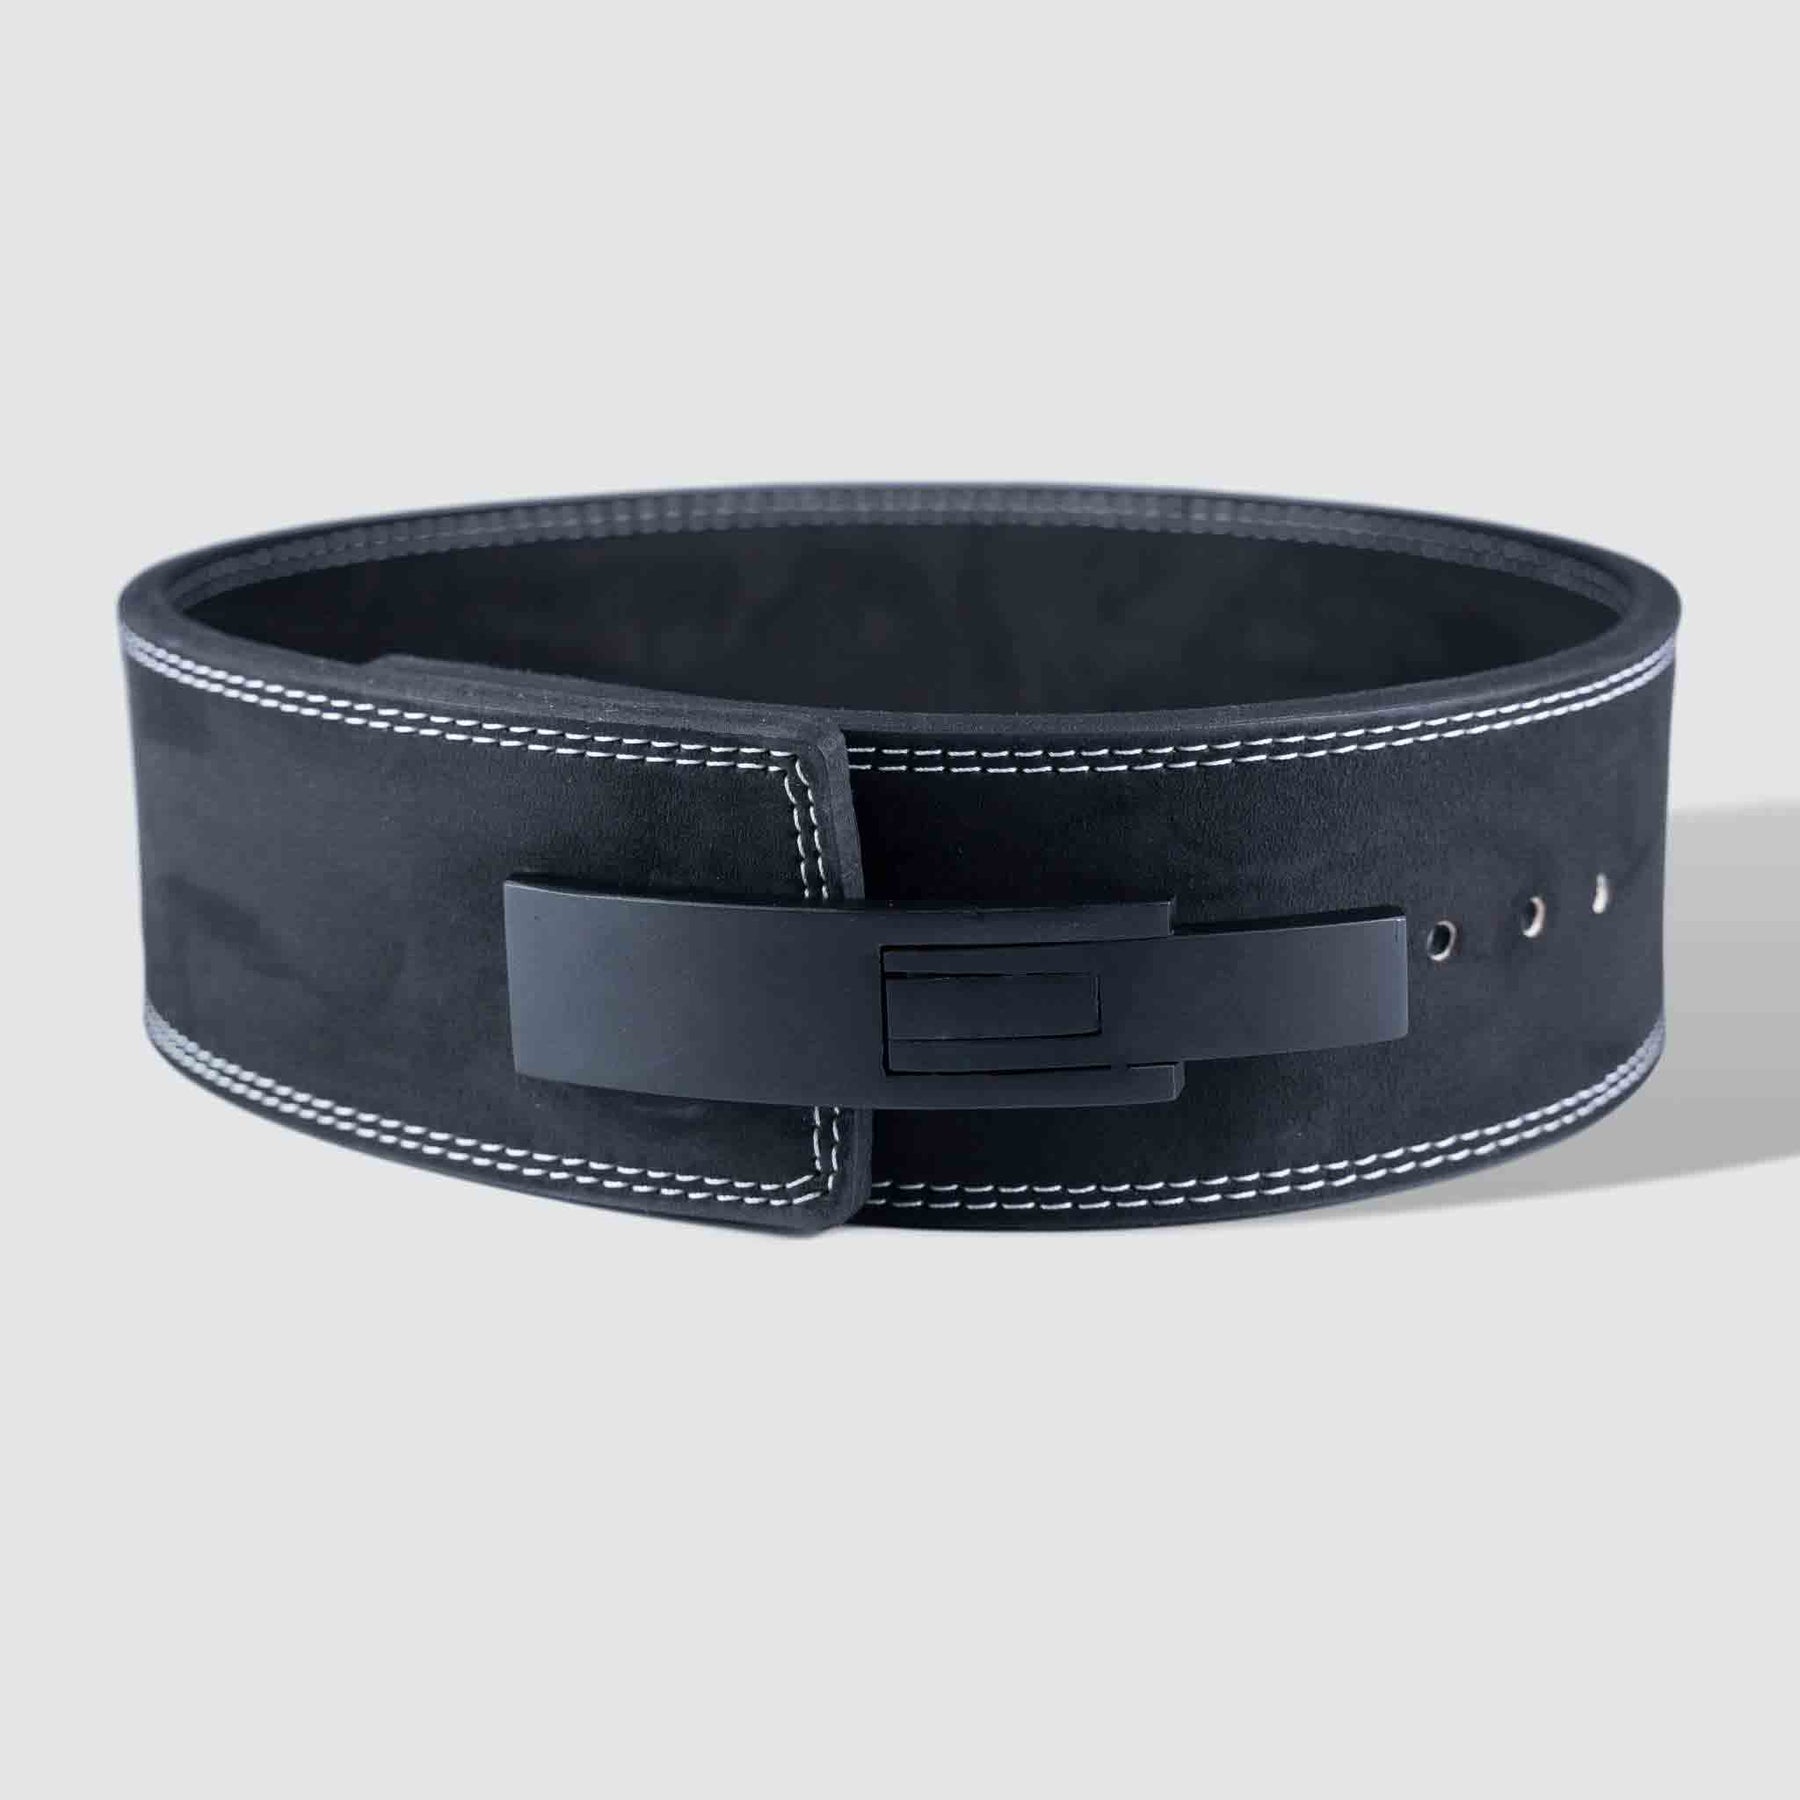 Weightlifting Belt for Men and Women, Black 10mm Thick, 4-Inch Wide Lever  Belt for Safely Increasing Weight and Lifting Power for Deadlifts, Squats